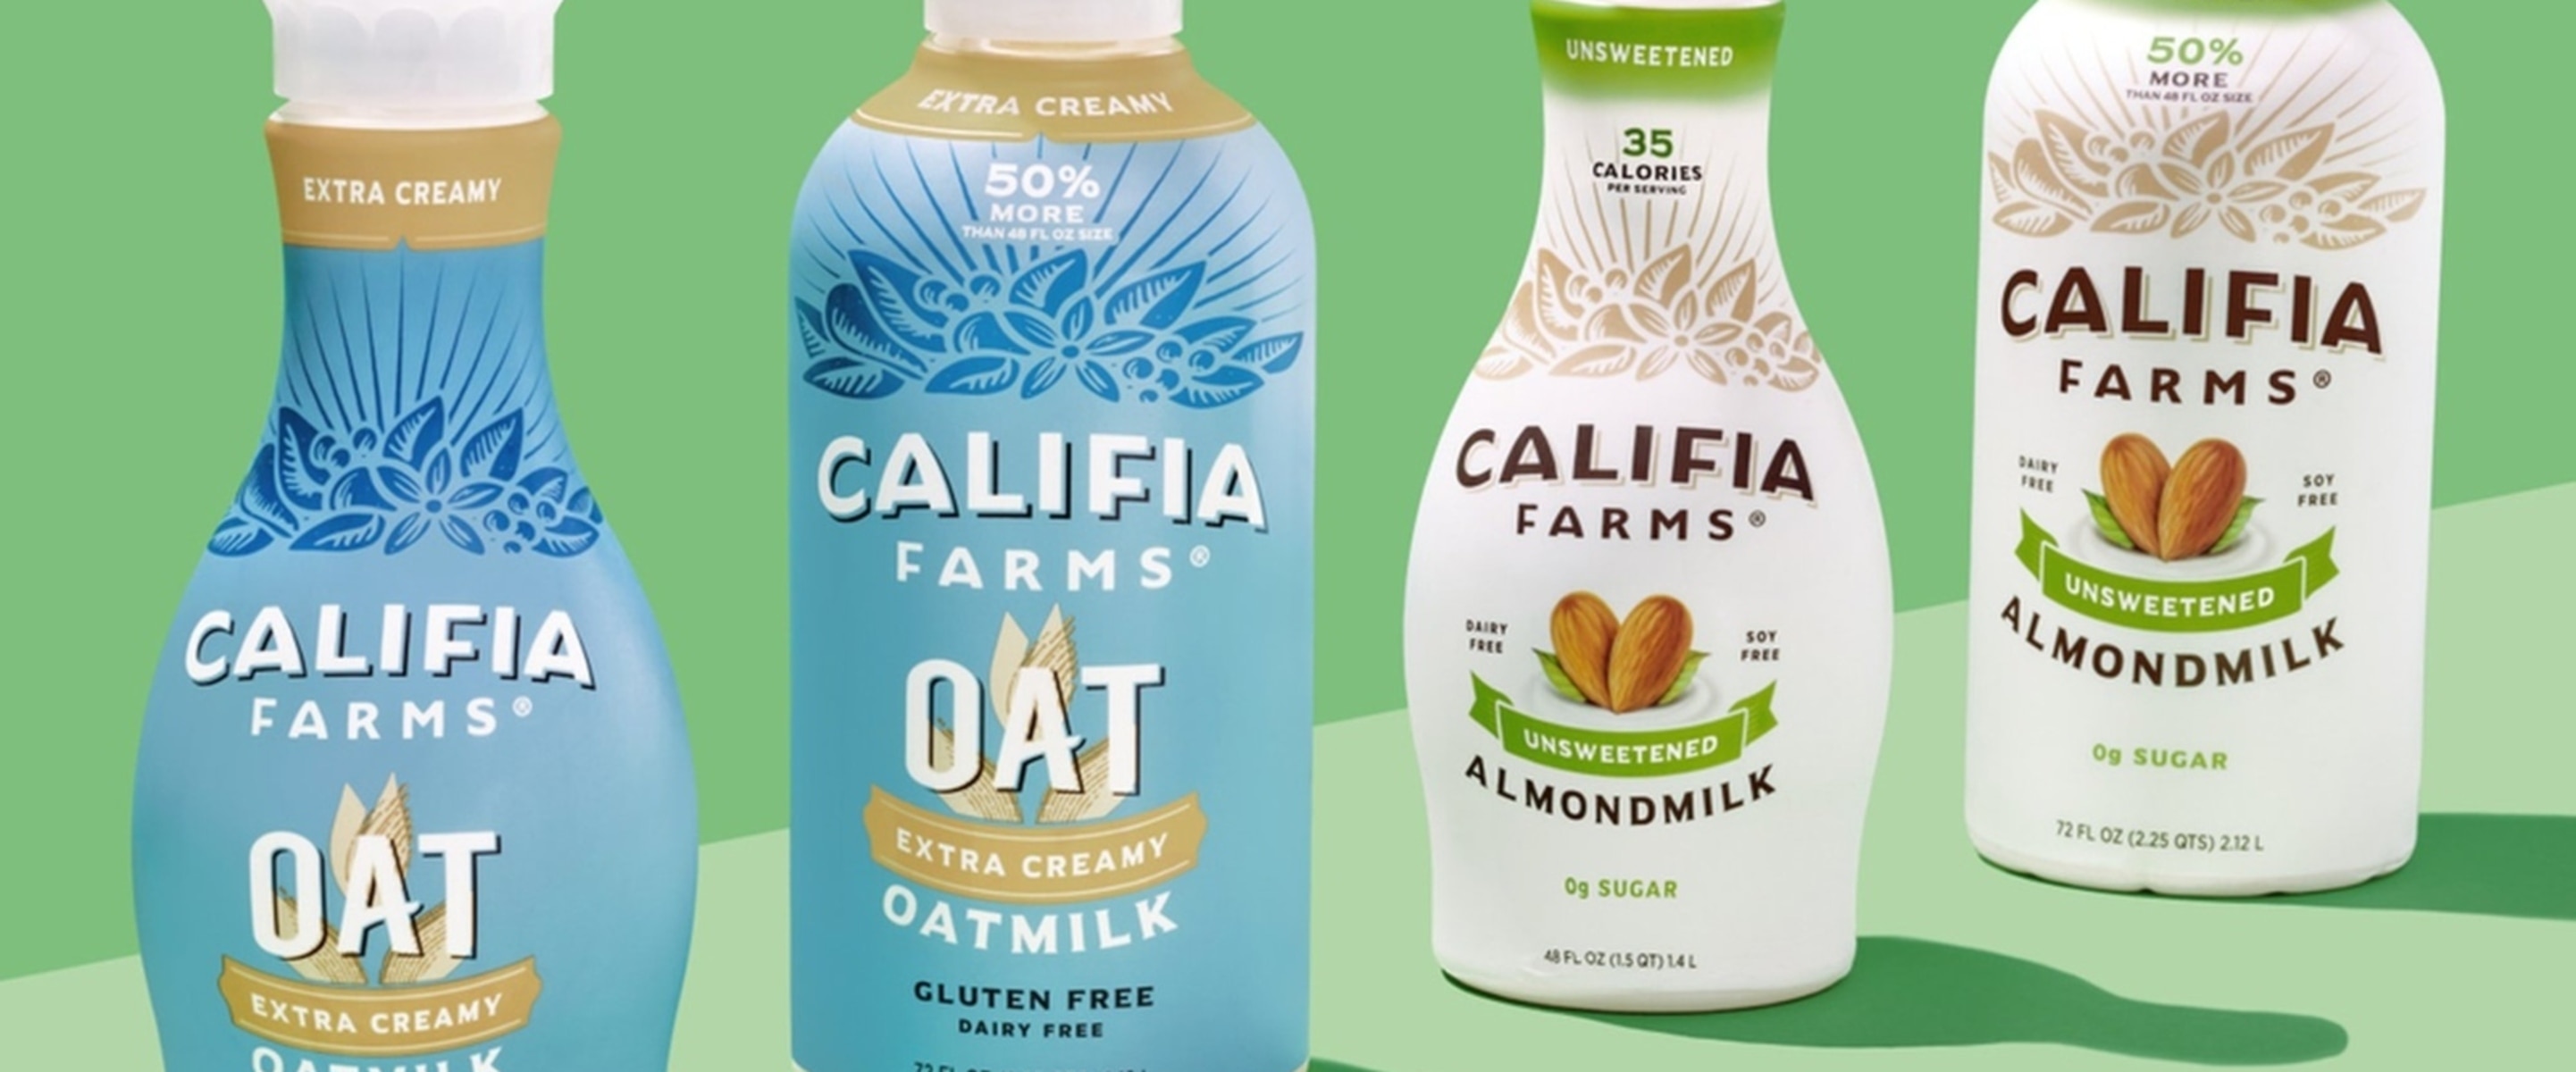 Your Guide to the Best Vegan Dairy Products From Califia Farms&nbsp;